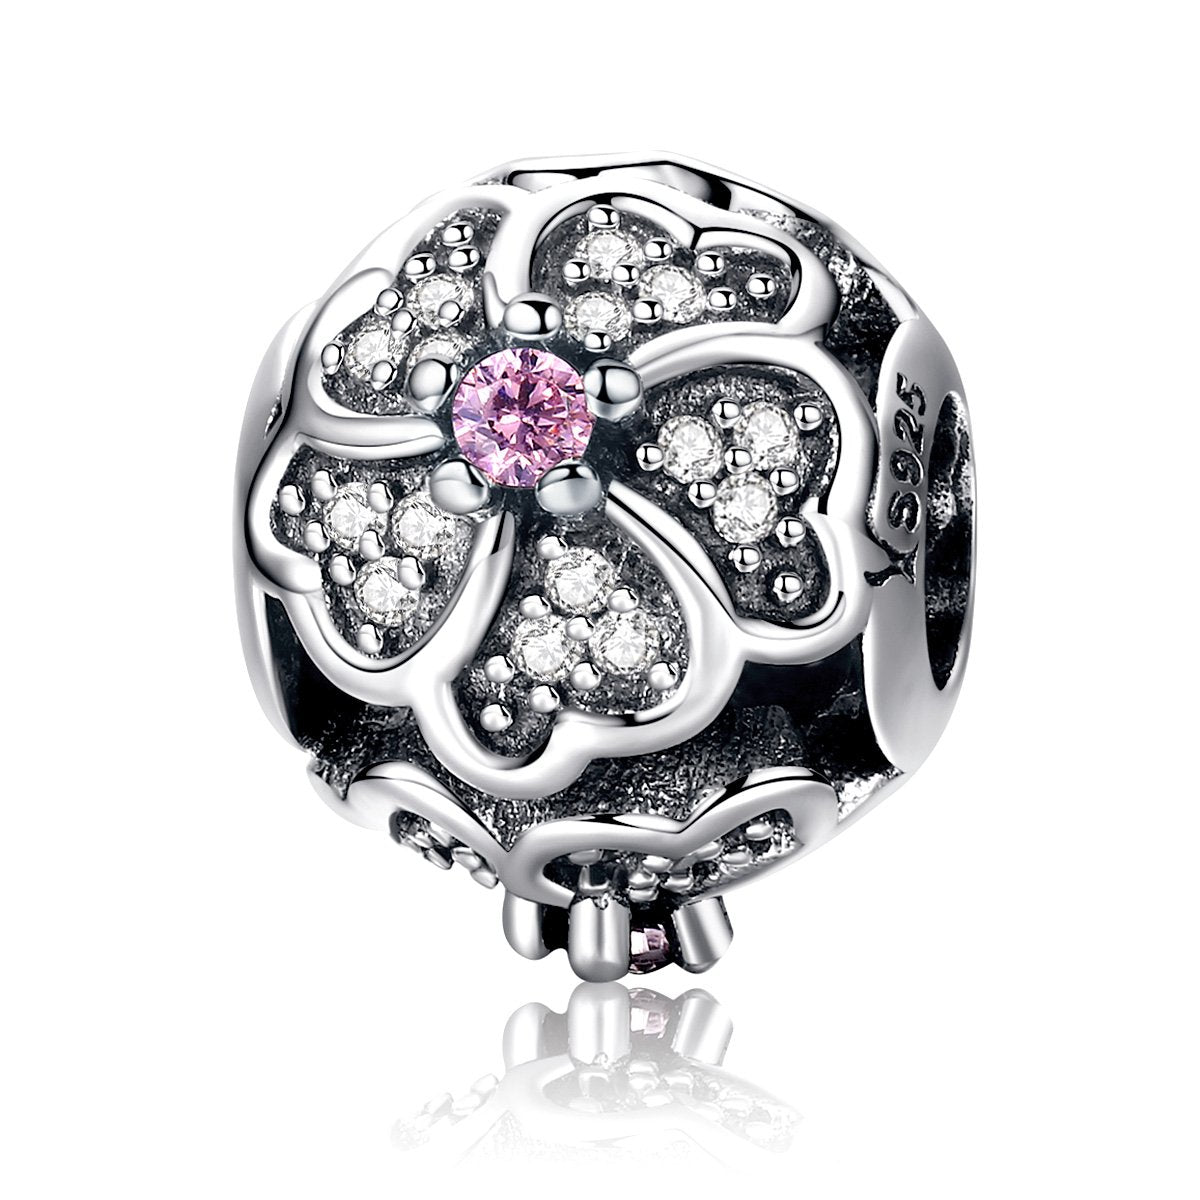 Sterling 925 silver charm the high land floral puls bead pendant fits Pandora charm and European charm bracelet Xaxe.com